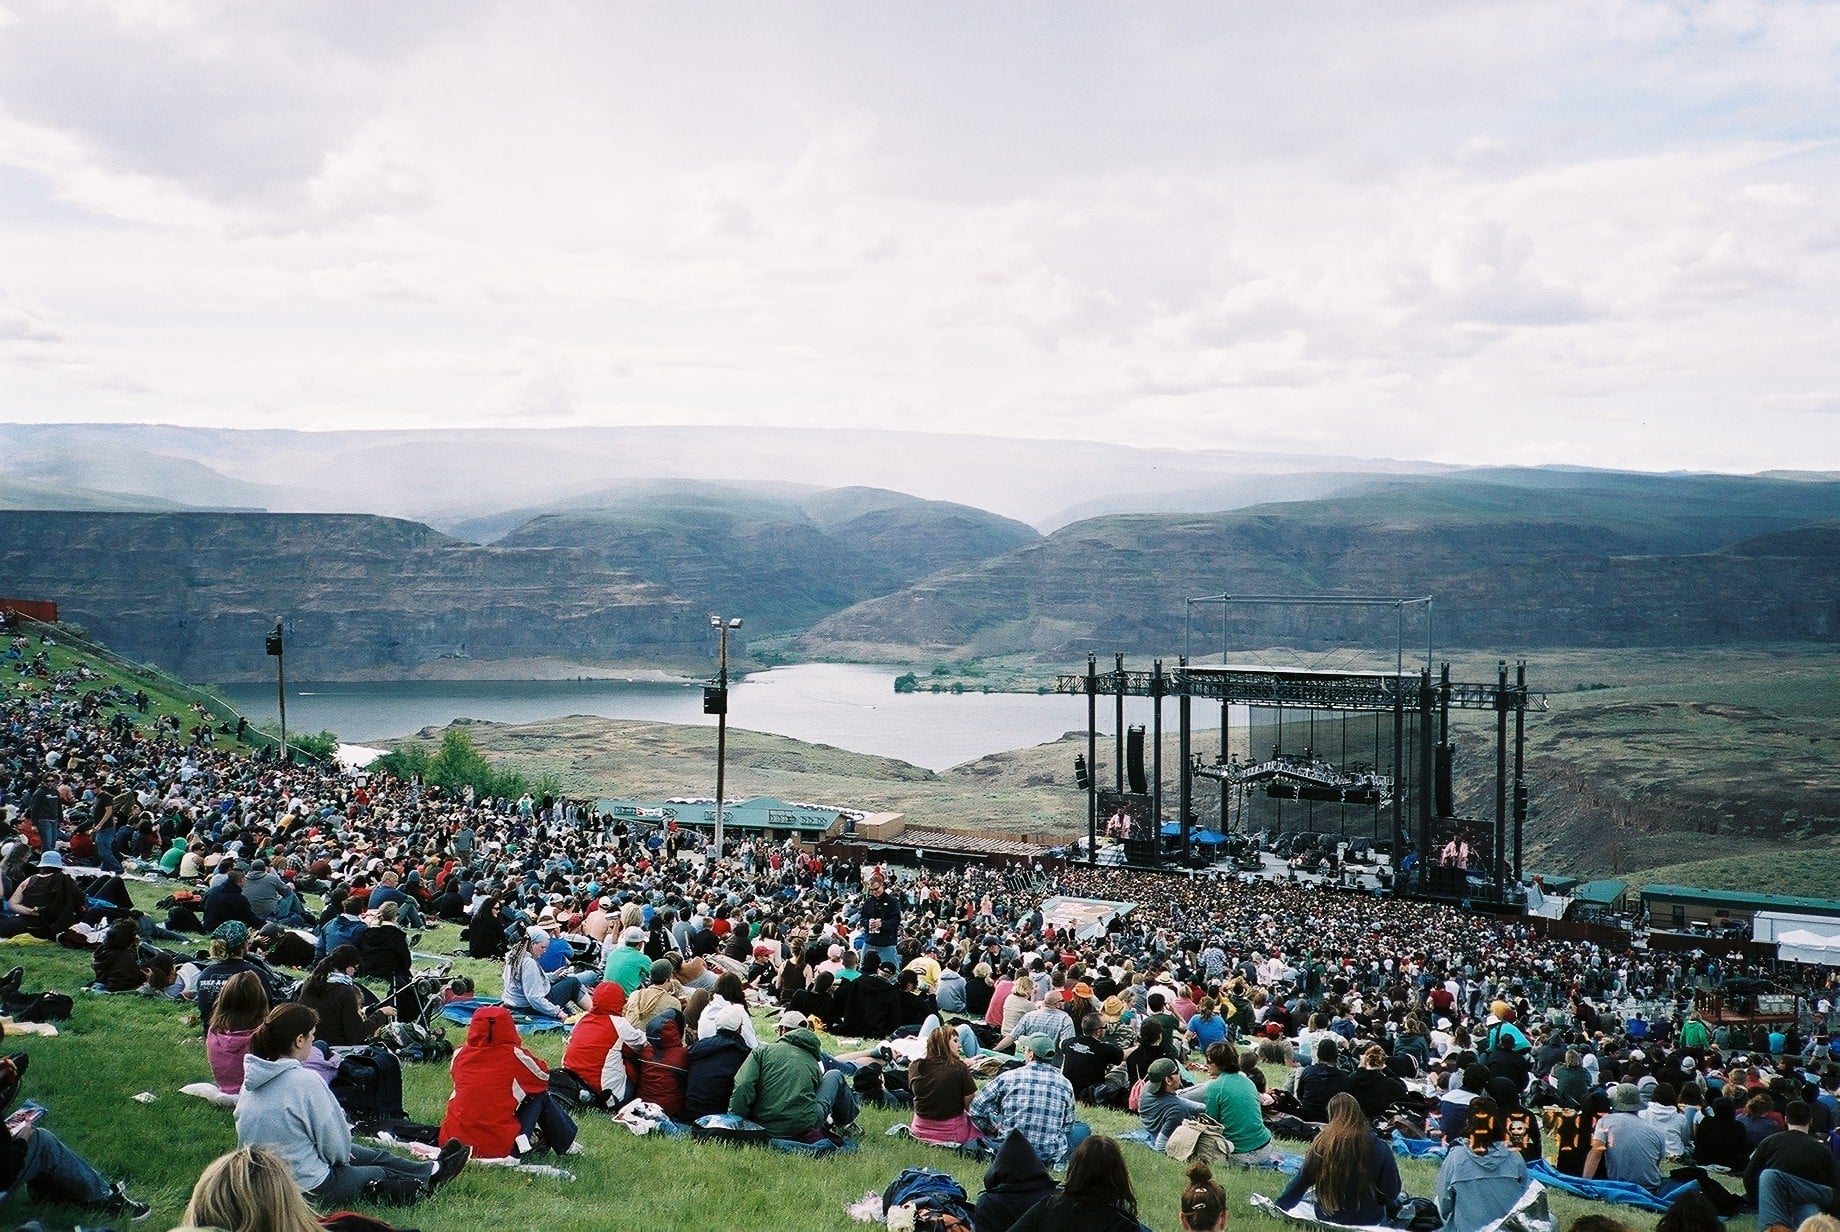 Gorge Amphitheater Seating Chart